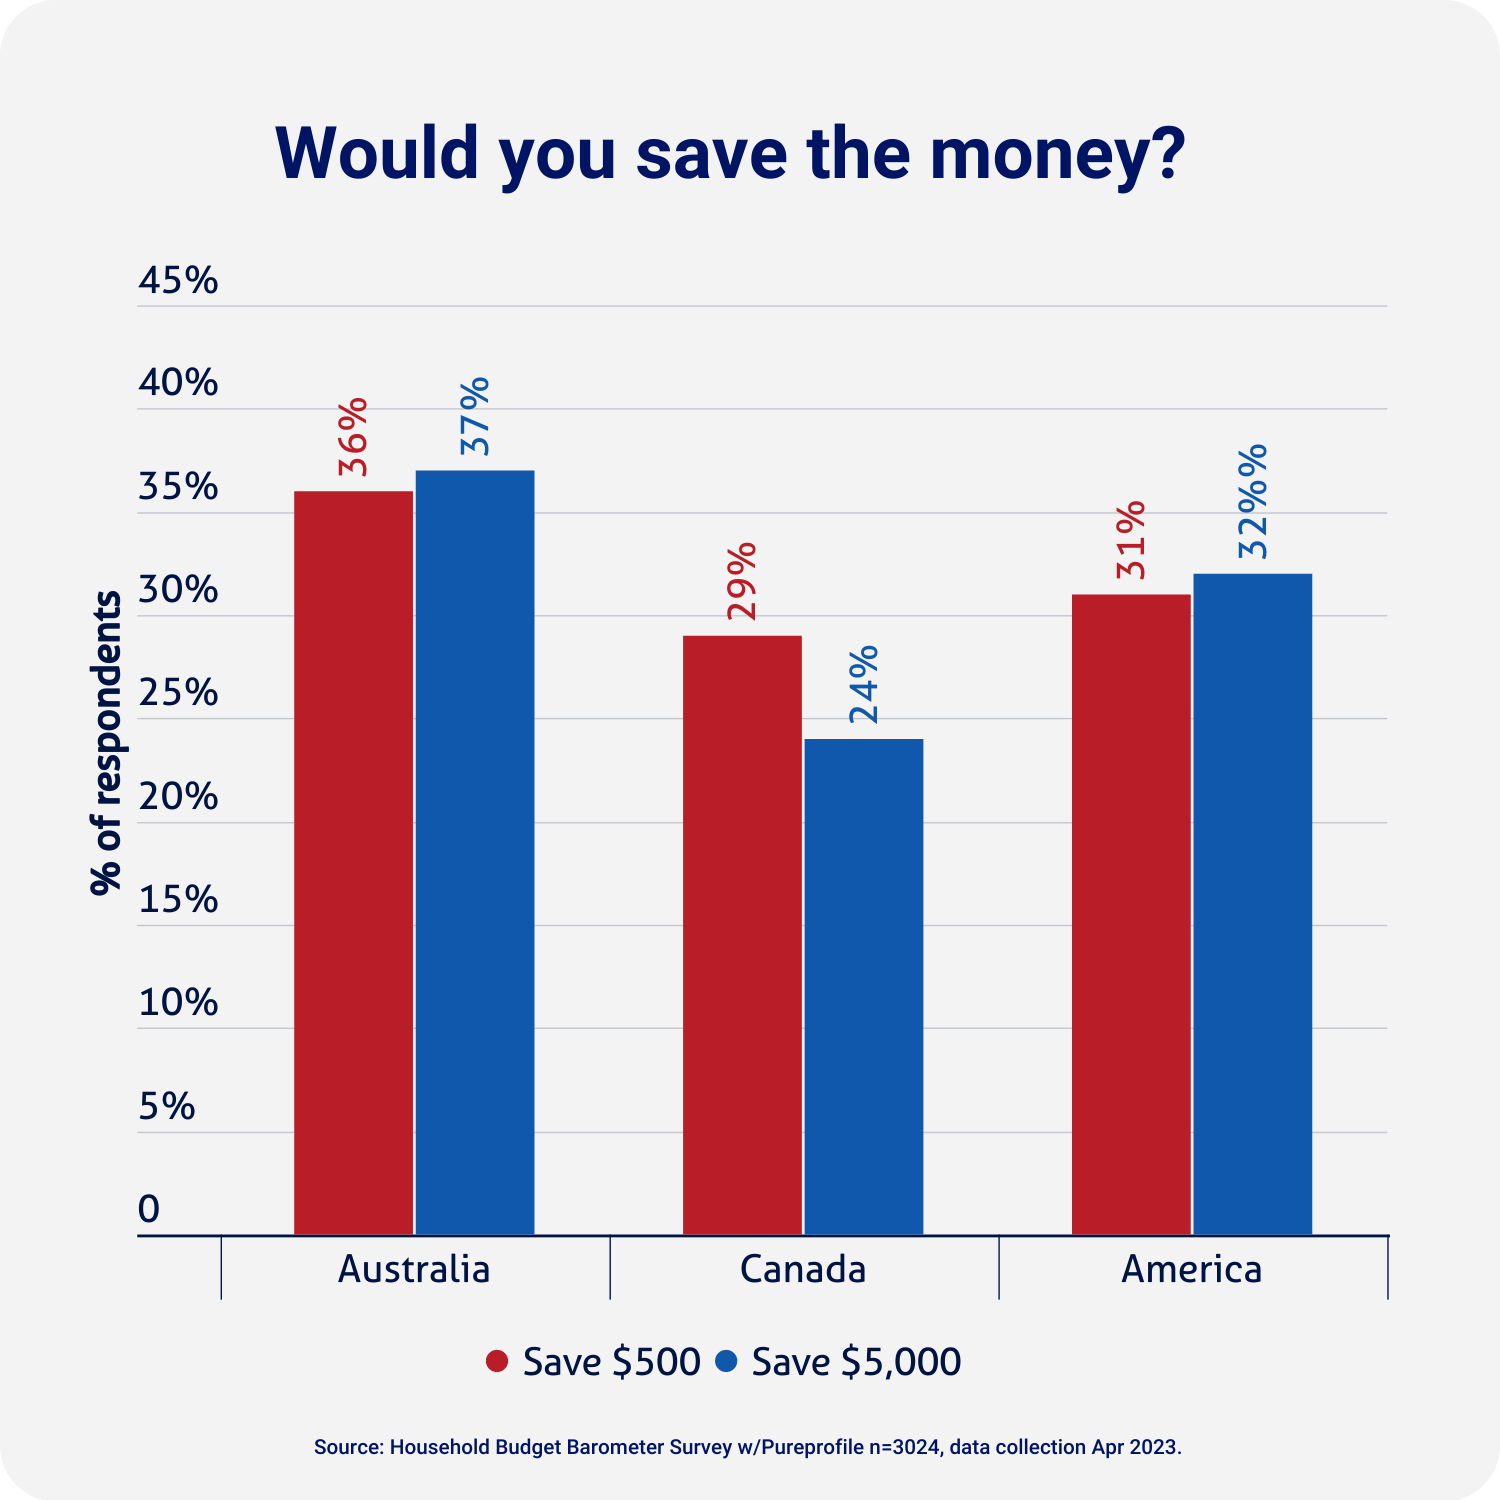 Graph showing whether Americans, Australians and Canadians would save $500 and $5000